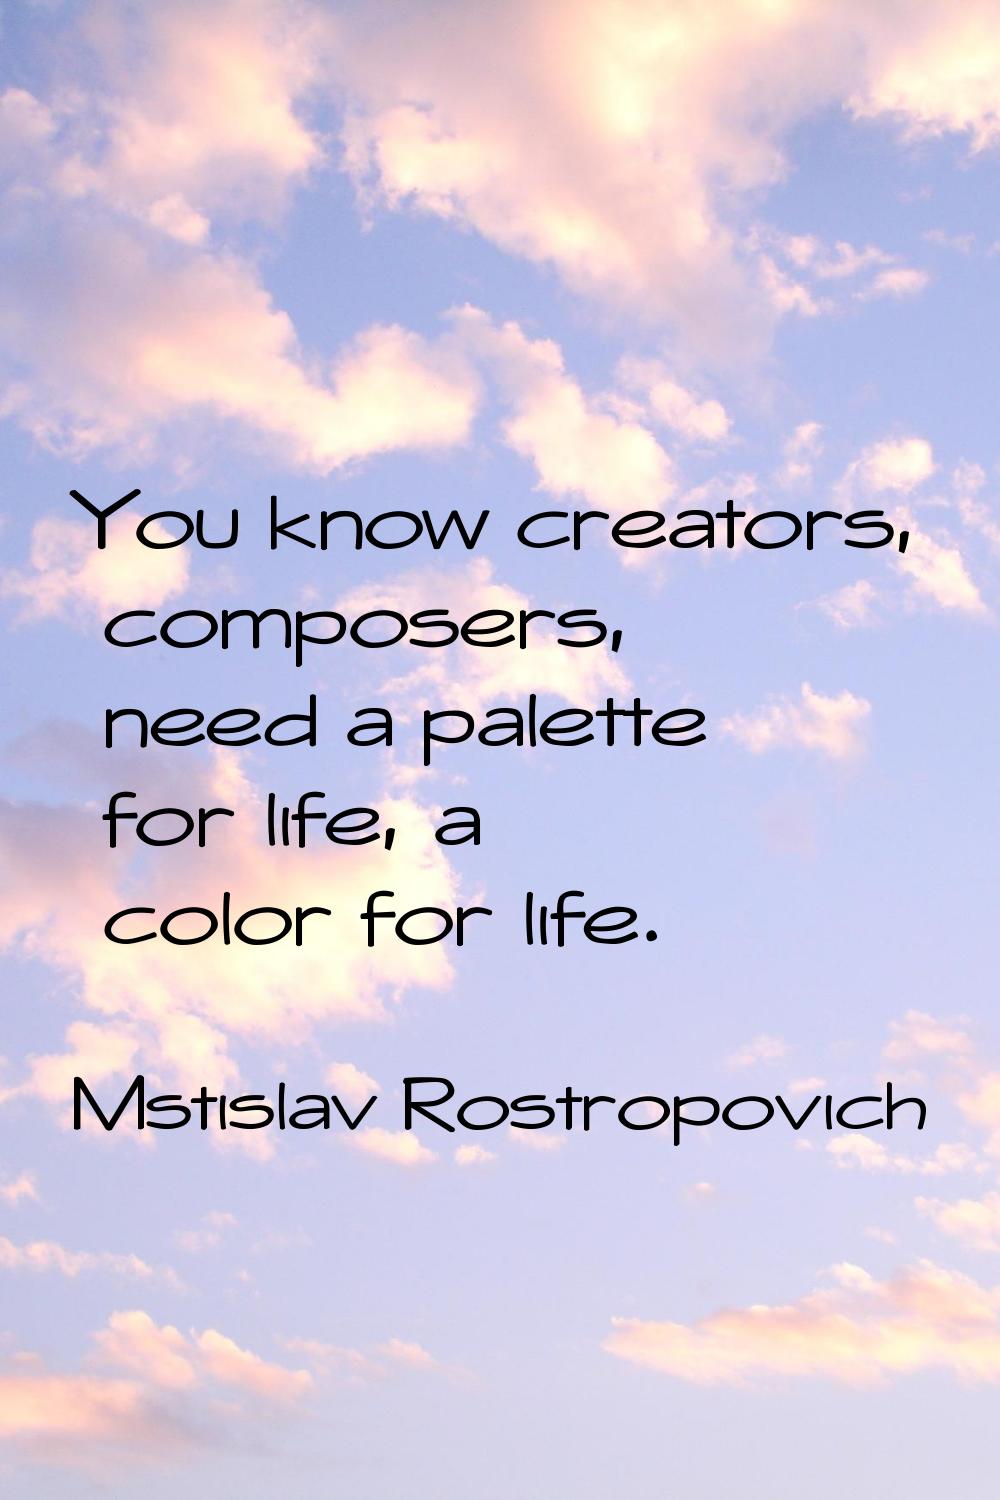 You know creators, composers, need a palette for life, a color for life.